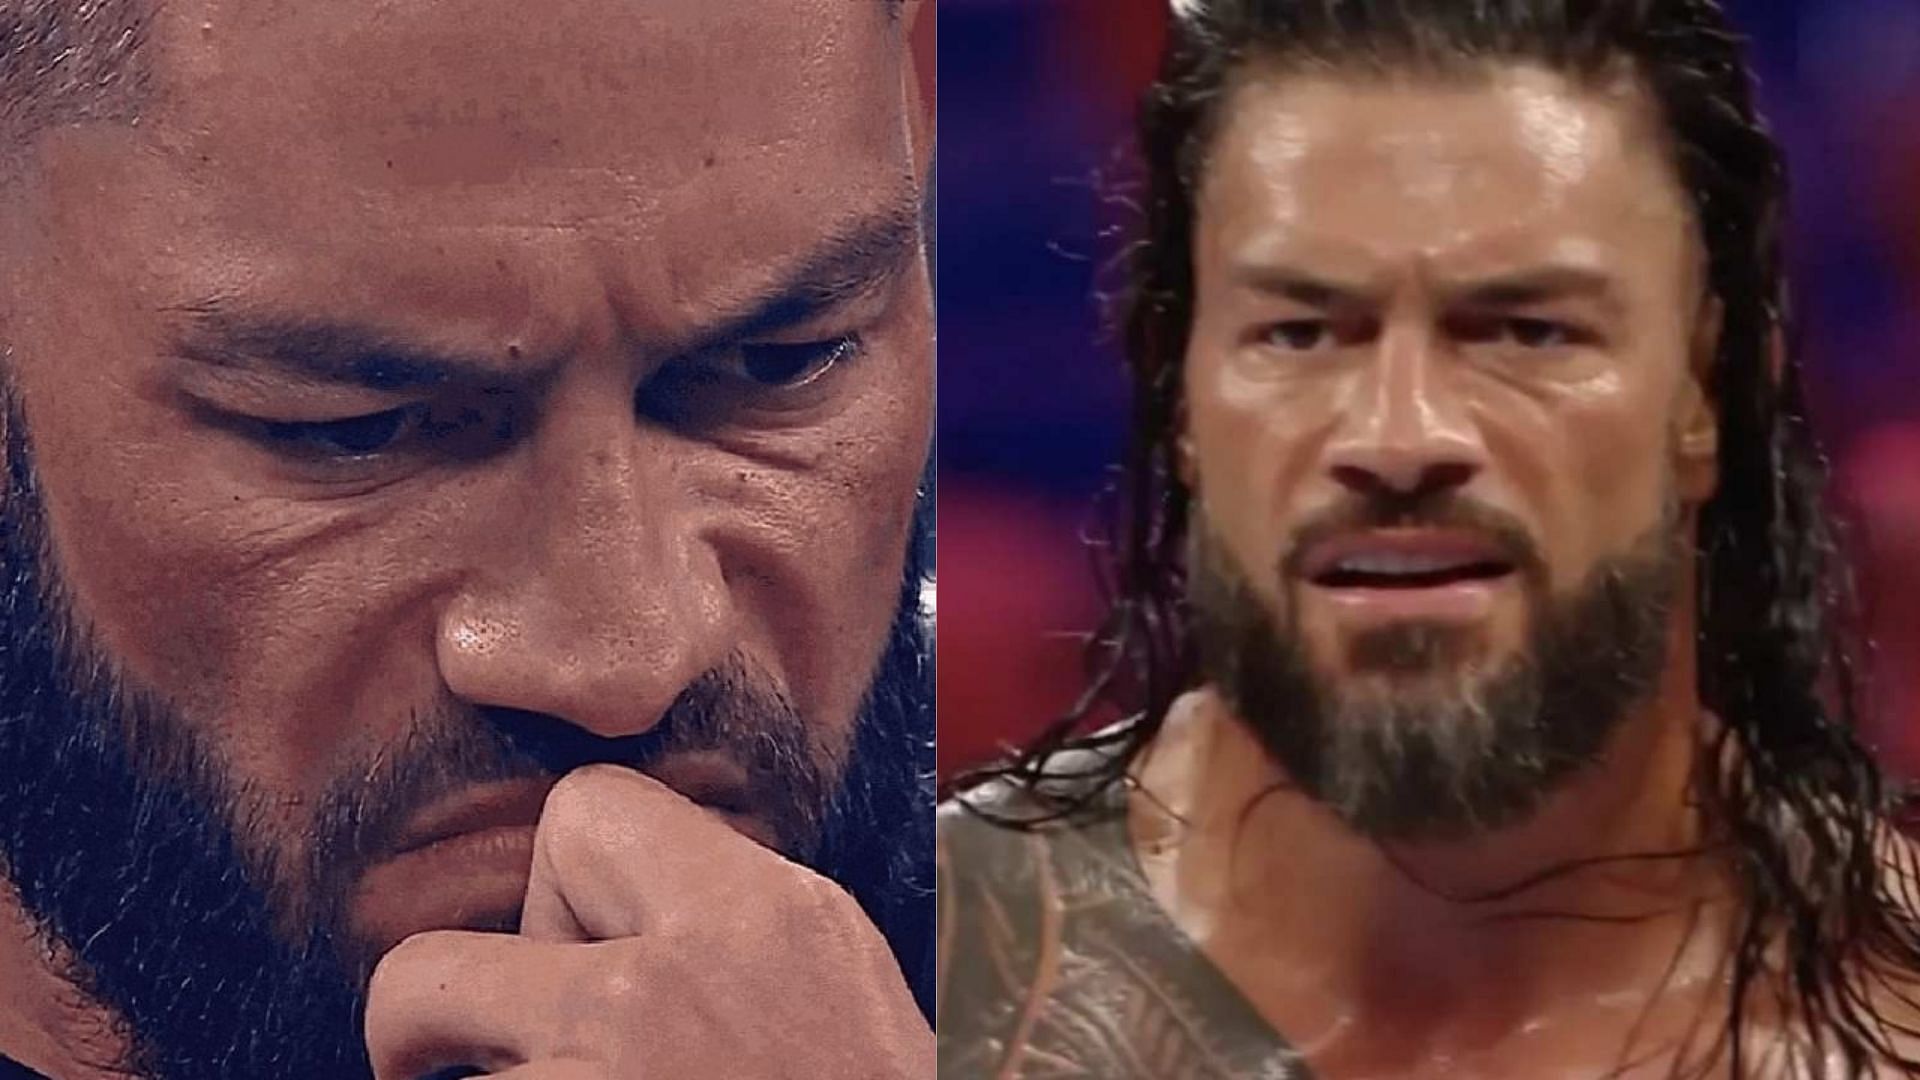 Roman Reigns was not happy this week on SmackDown